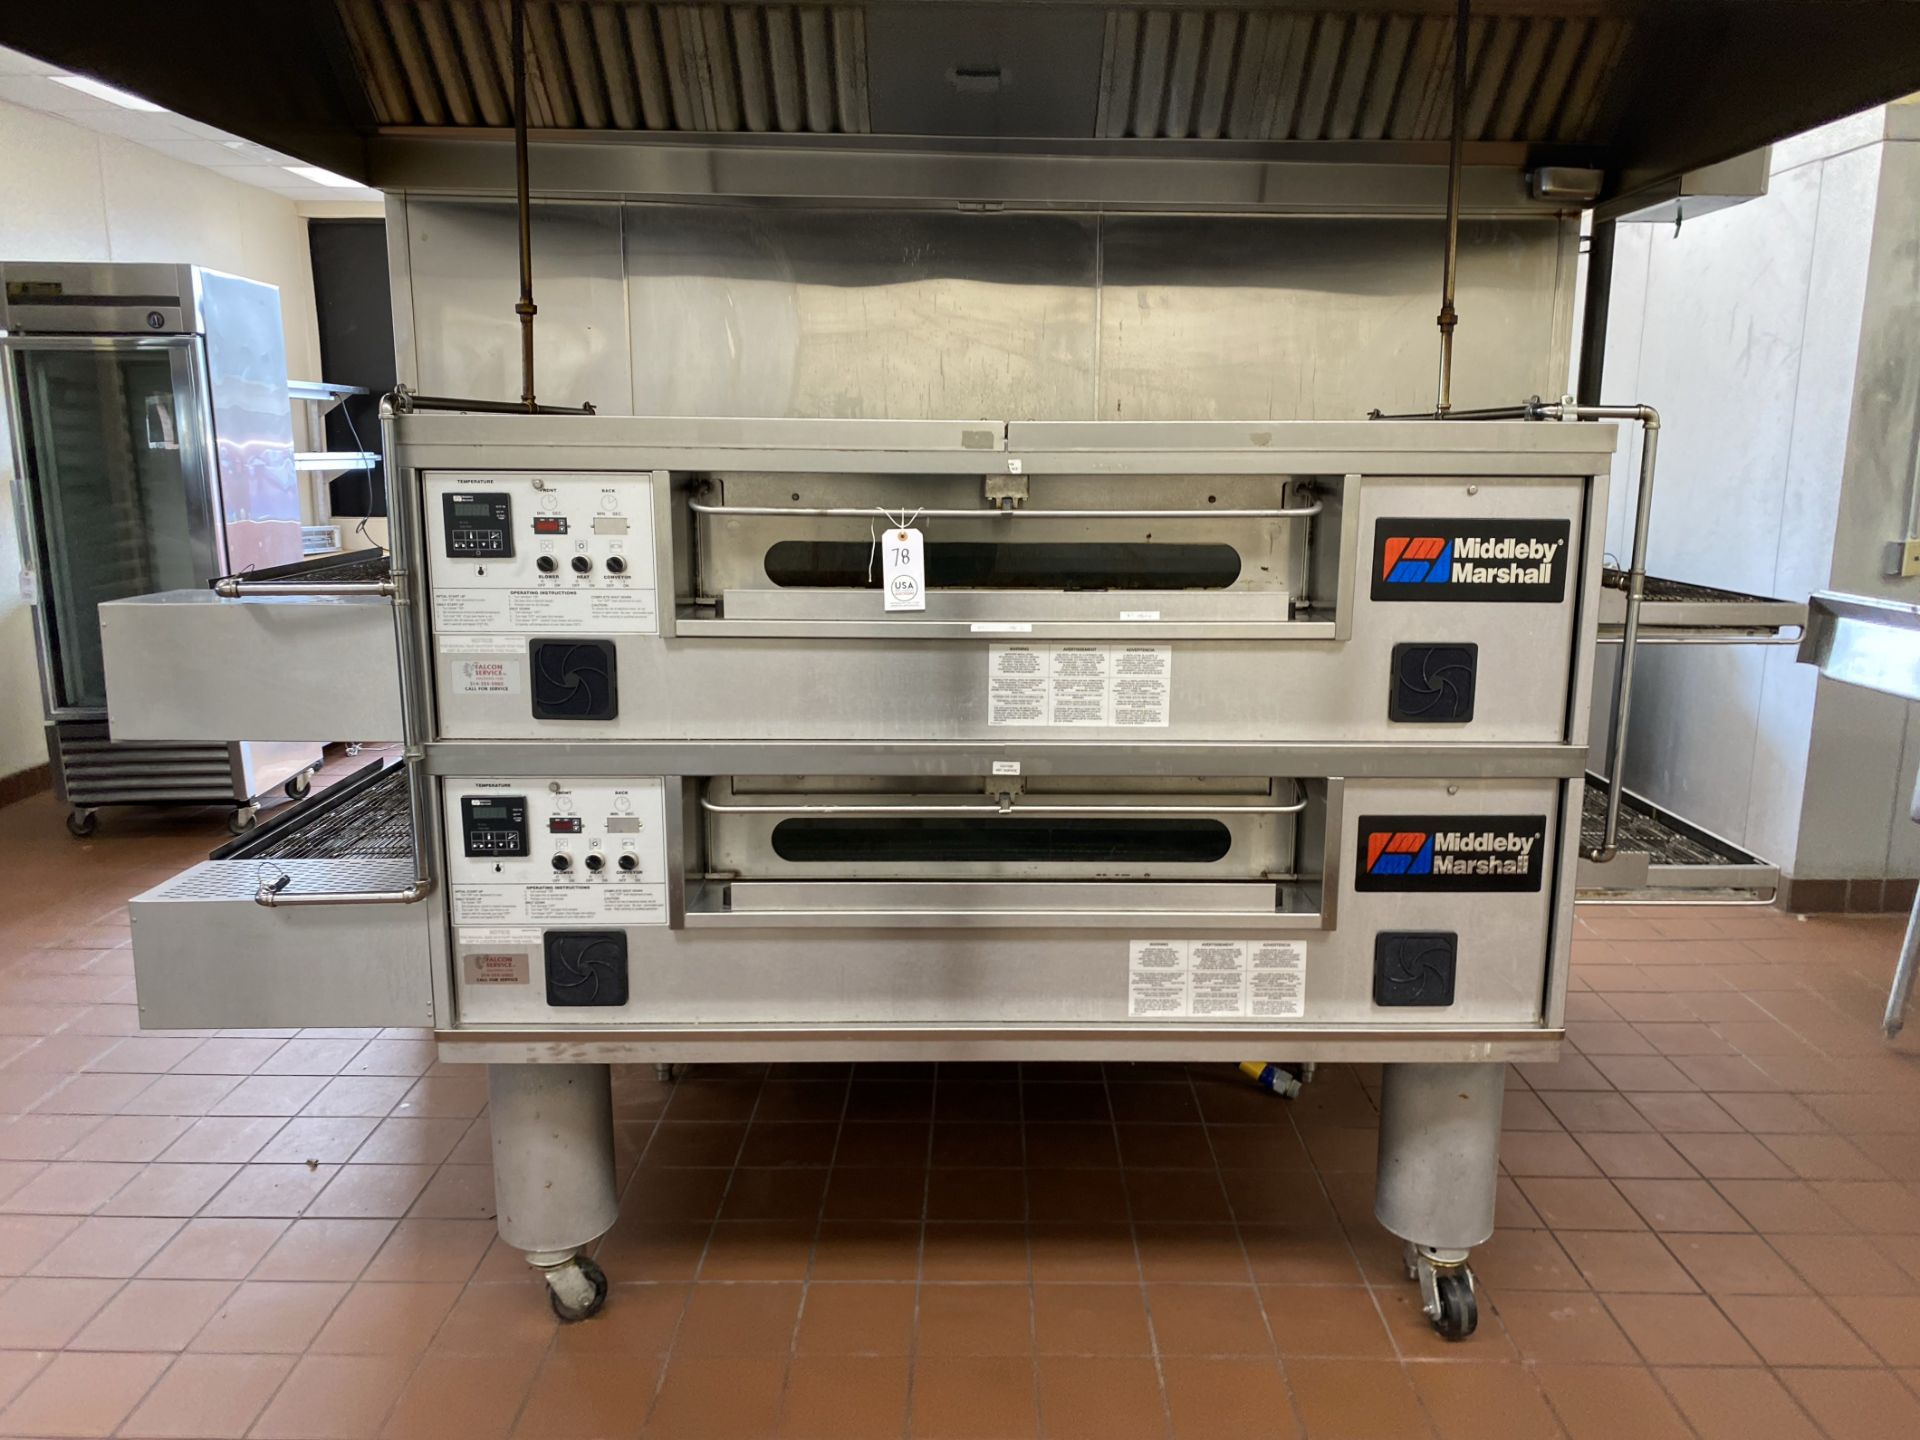 Middleby Marshall PS570 Commercial Pizza Oven